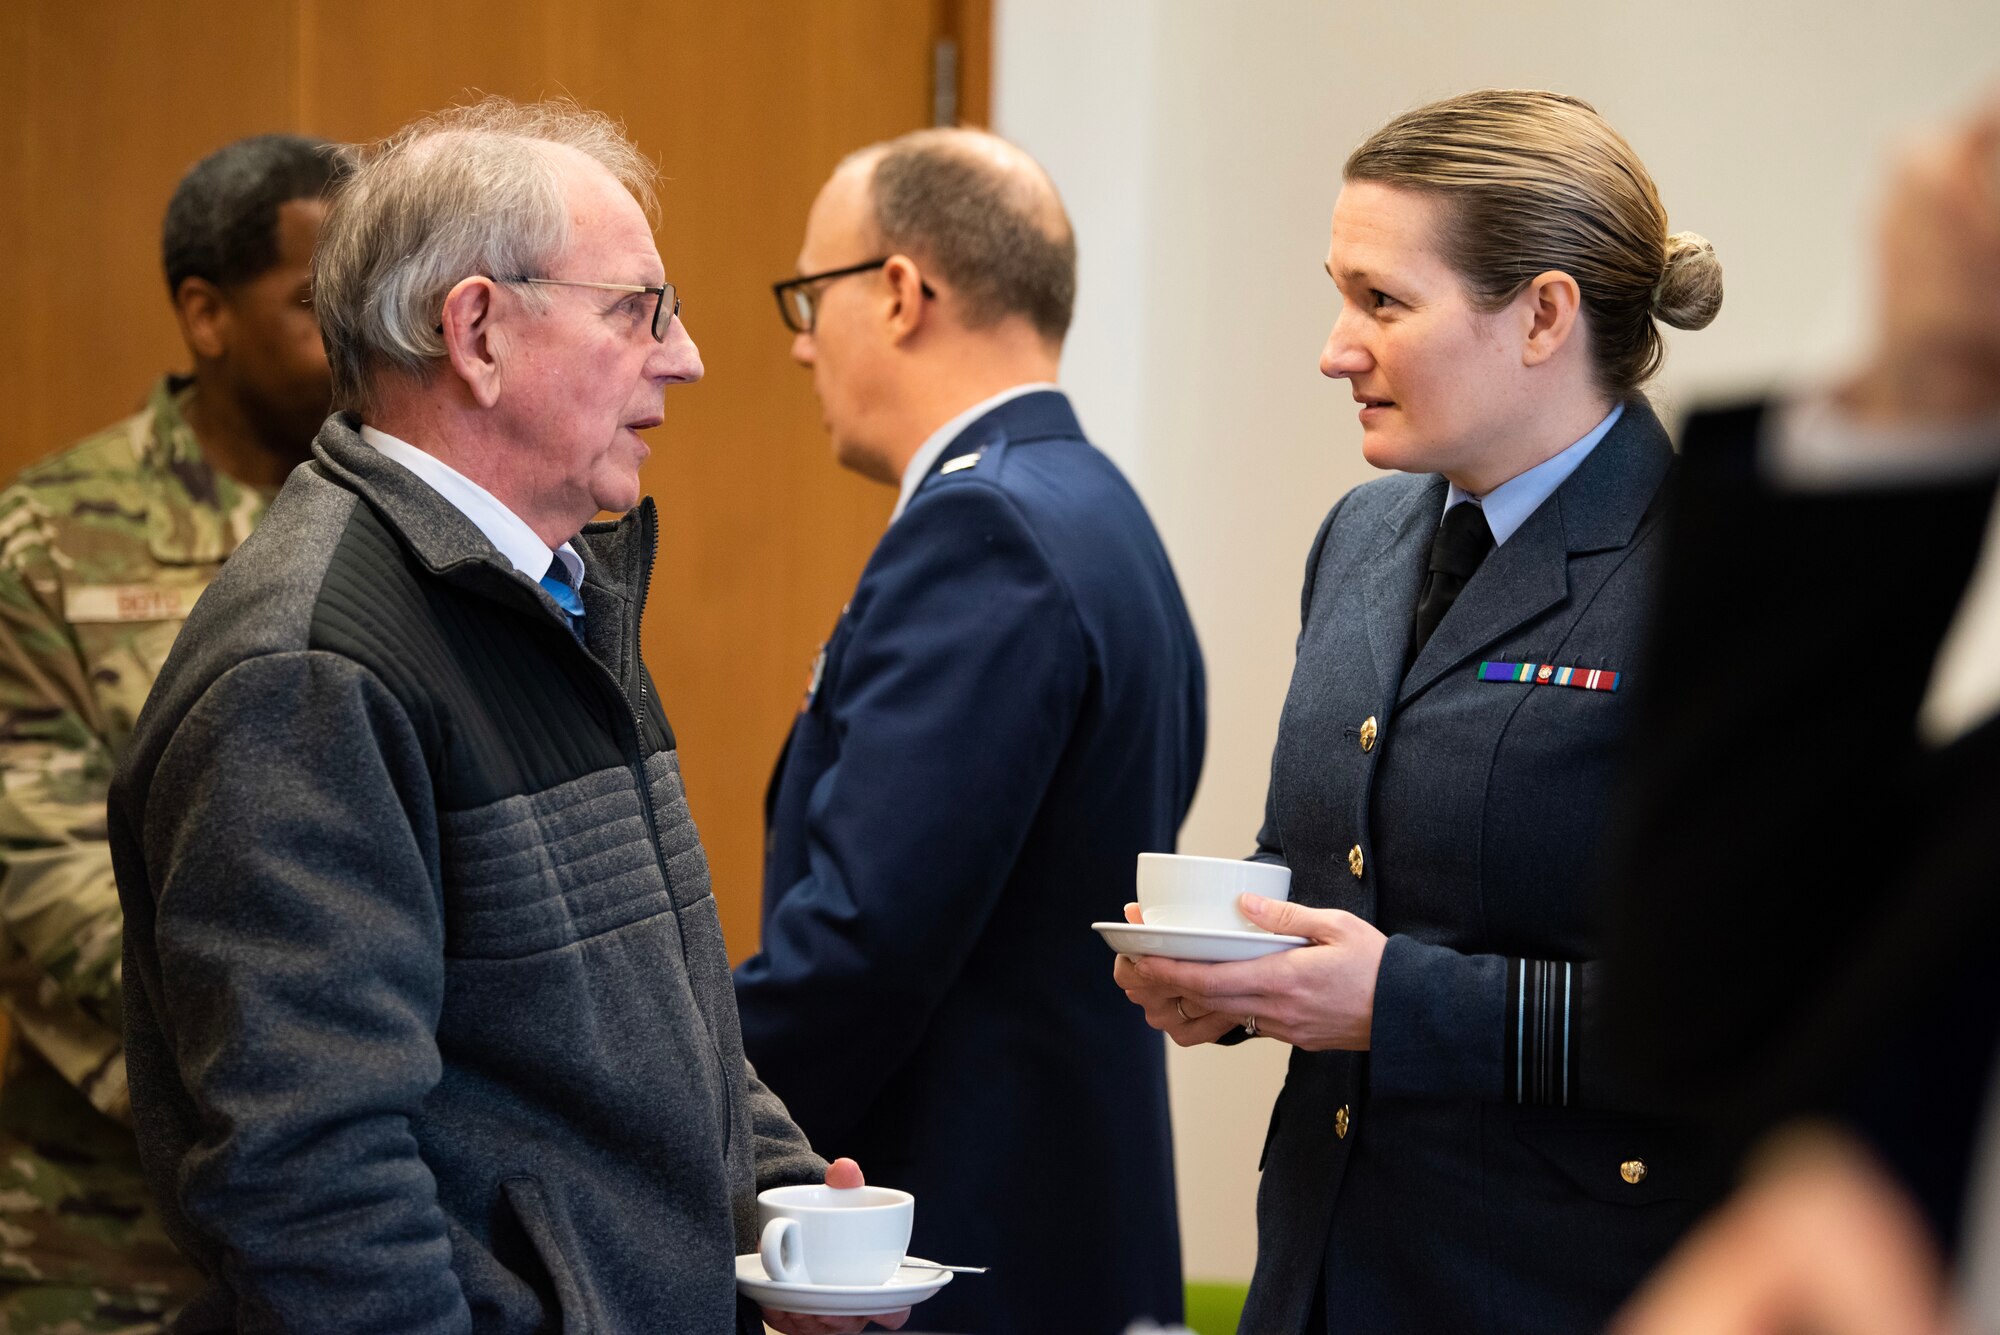 Royal Air Force Sqn. Ldr. Tina Sheeran, right, RAF commander of RAF Alconbury, RAF Croughton and RAF Molesworth, speaks with a distinguished guest after a Ceremony of Remembrance at Stanwick Lakes, England, Feb. 22, 2024. U.S. and U.K. leaders gathered to honor 17 Airmen who died in a midair collision on Feb. 22, 1944, involving B-17 Flying Fortresses from the 303rd Bombardment Group at RAF Molesworth and the 384th Bombardment Group at RAF Grafton Underwood. The Airmen were part of Operation Argument, or "The Big Week," targeting enemy industrial sites and aircraft facilities in Central Europe to secure Allied air superiority for the upcoming landings in France in June 1944. (U.S. Air Force photo by Staff Sgt. Jennifer Zima)